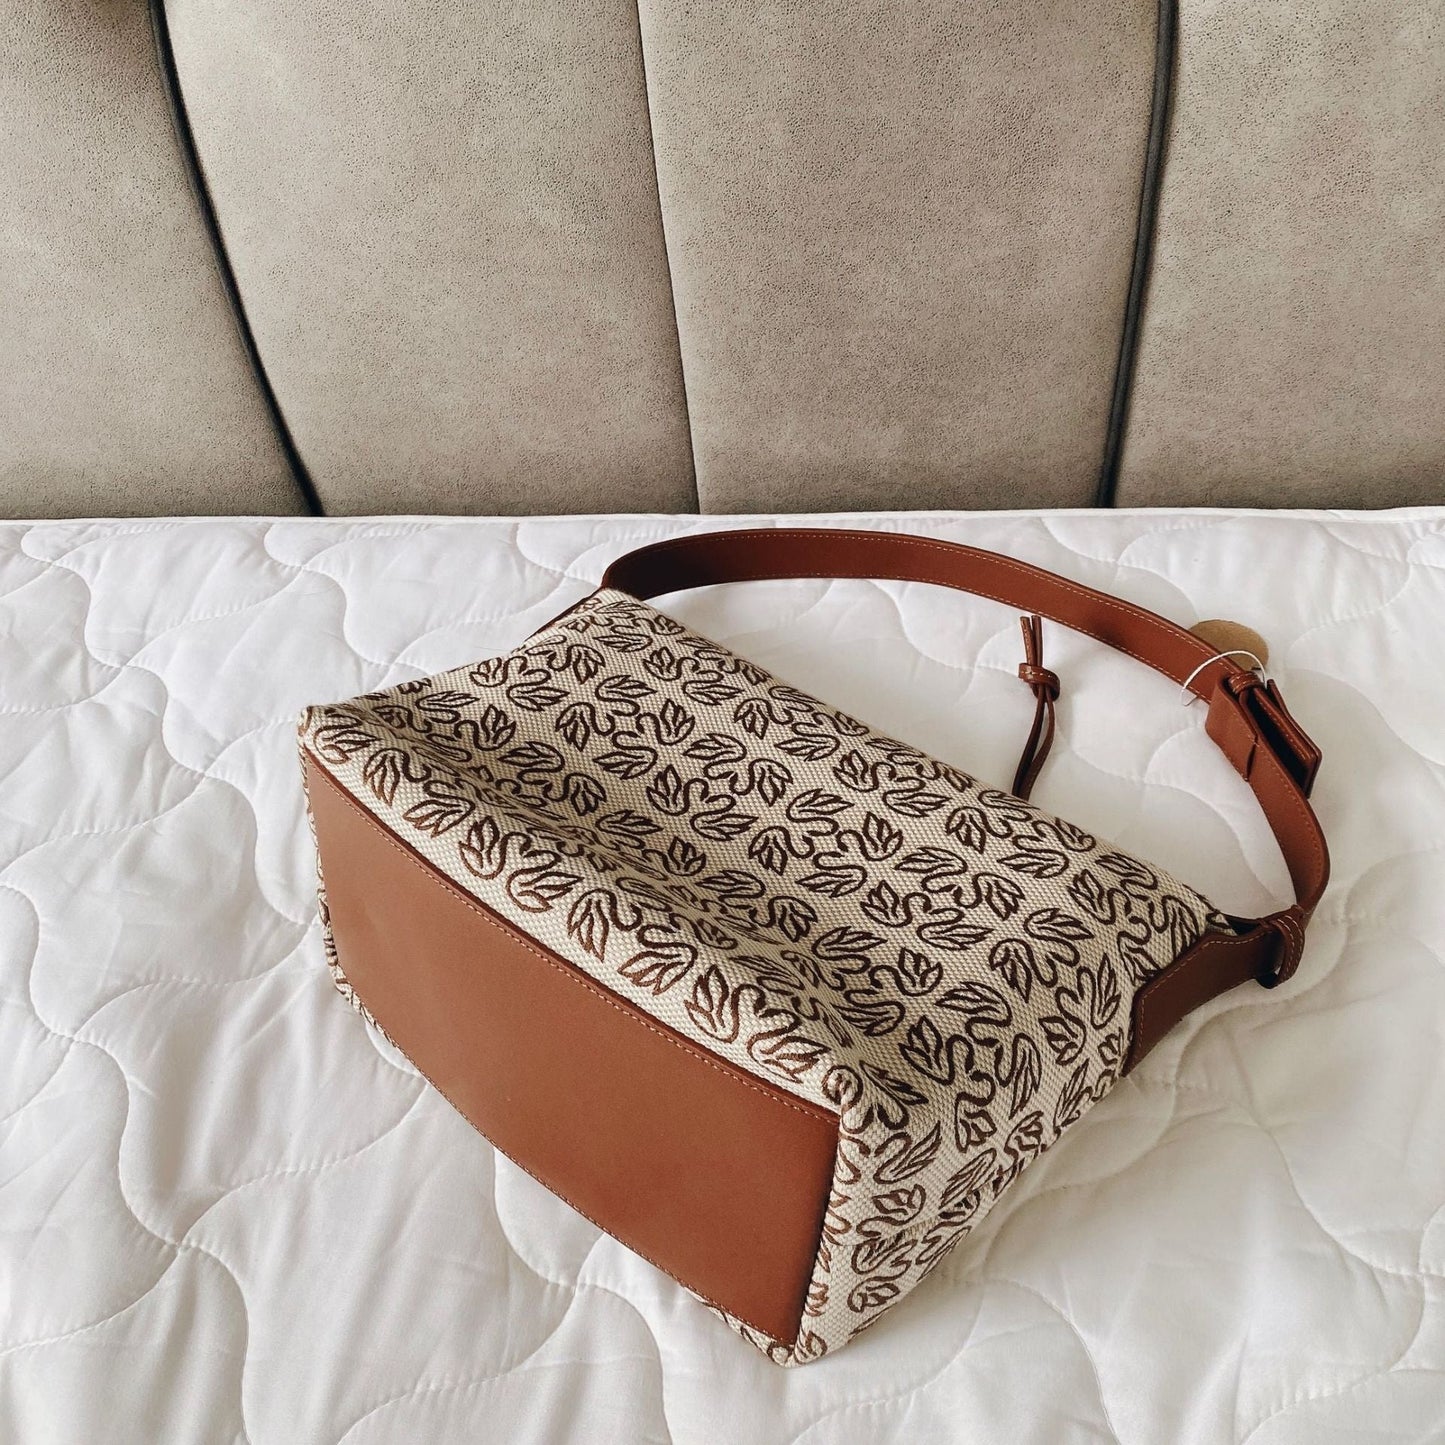 Jacquard Canvas Hobo Bag With Leather Trim